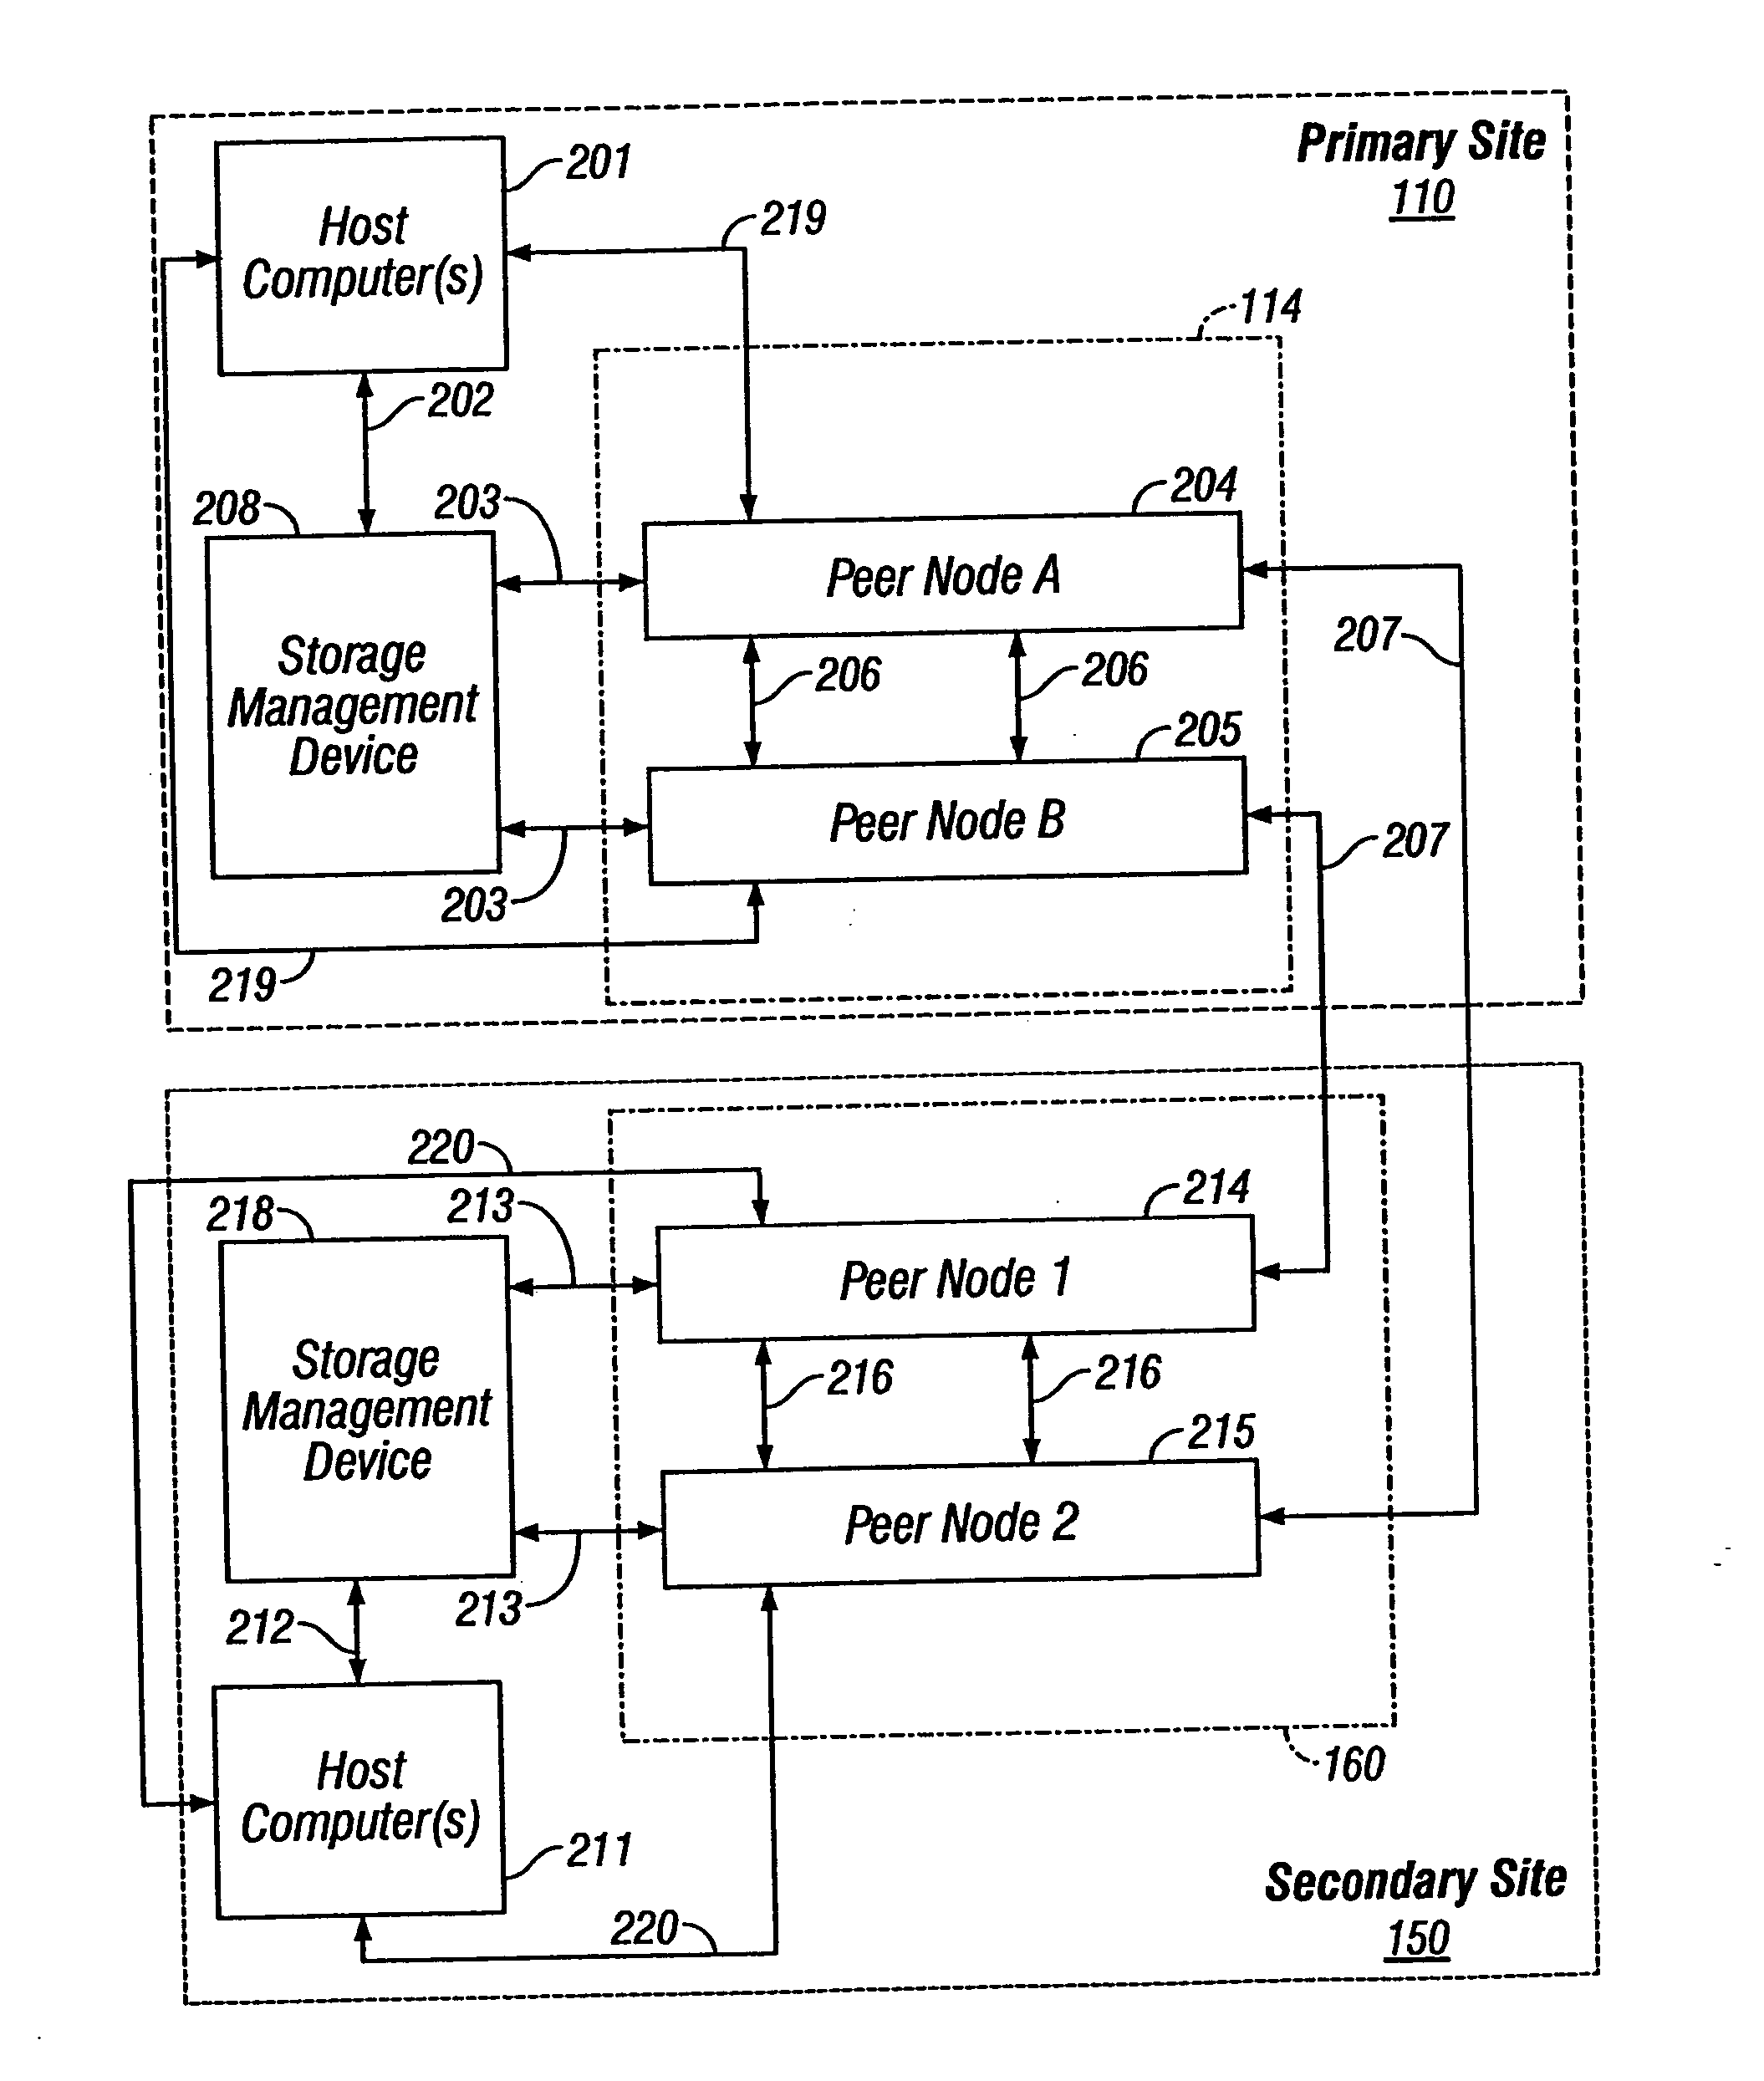 Autonomic learning method to load balance output transfers of two peer nodes